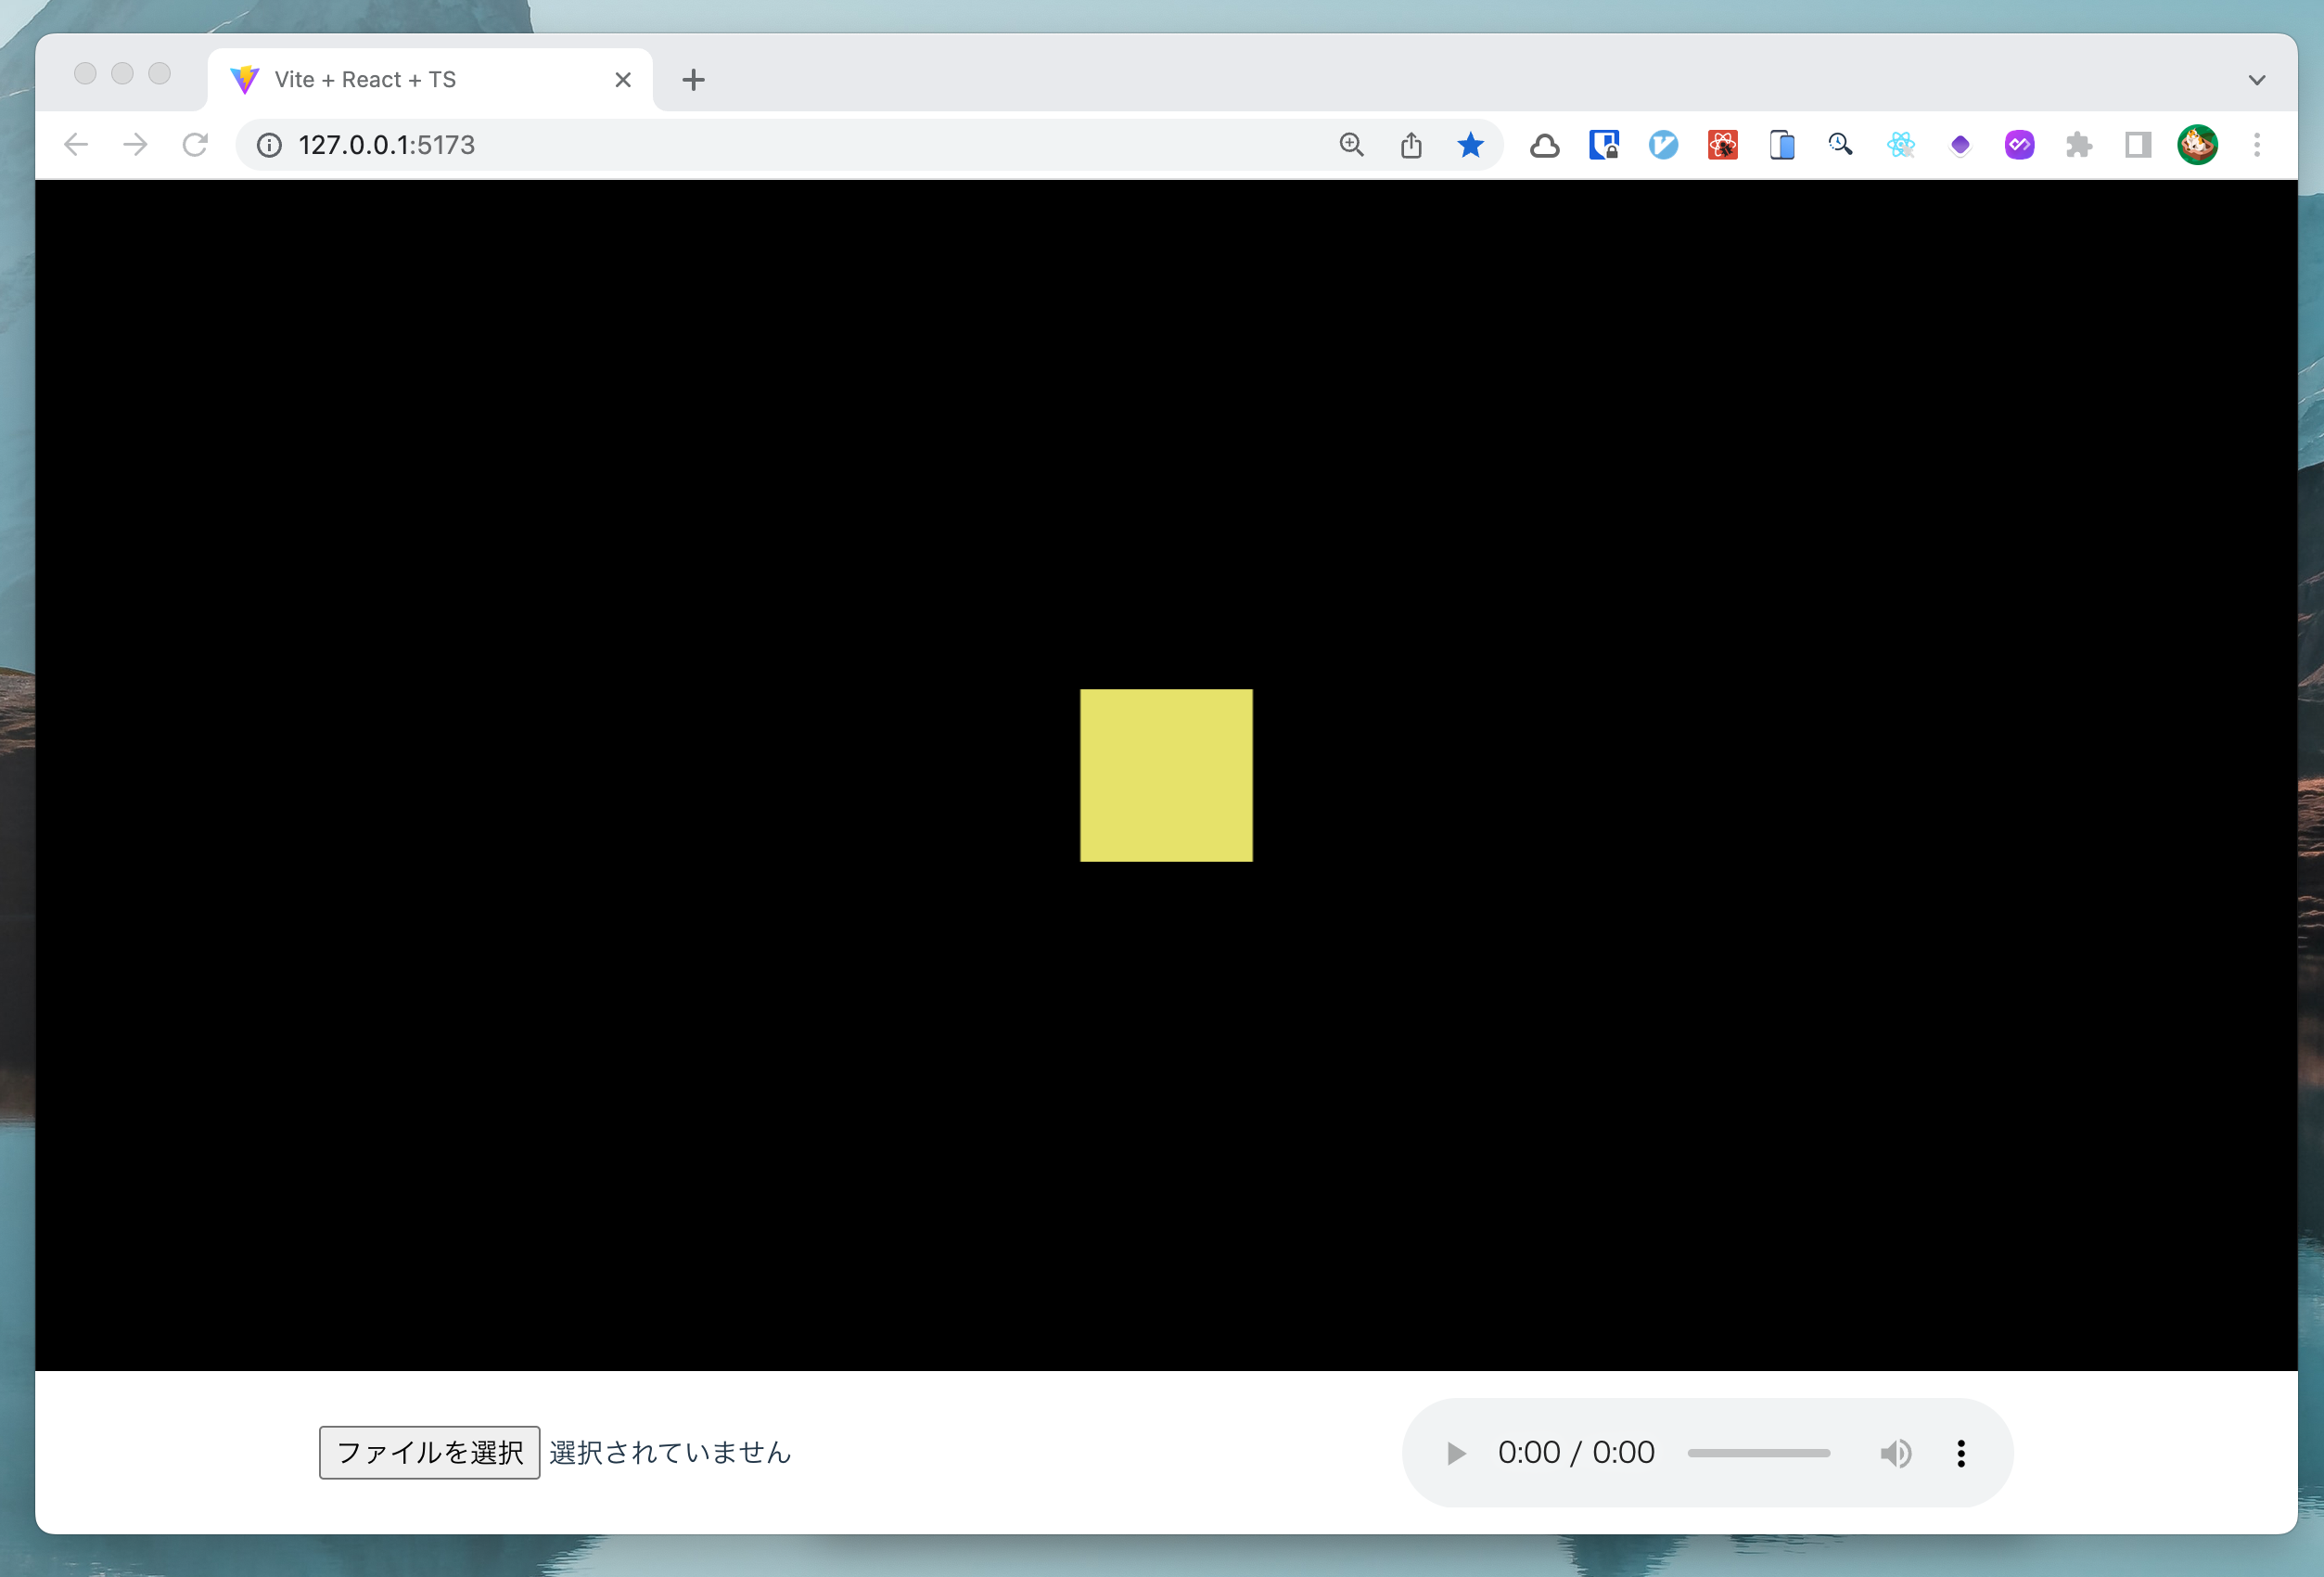 Three.js scene with a yellow cube inside, a file picker, and an audio player